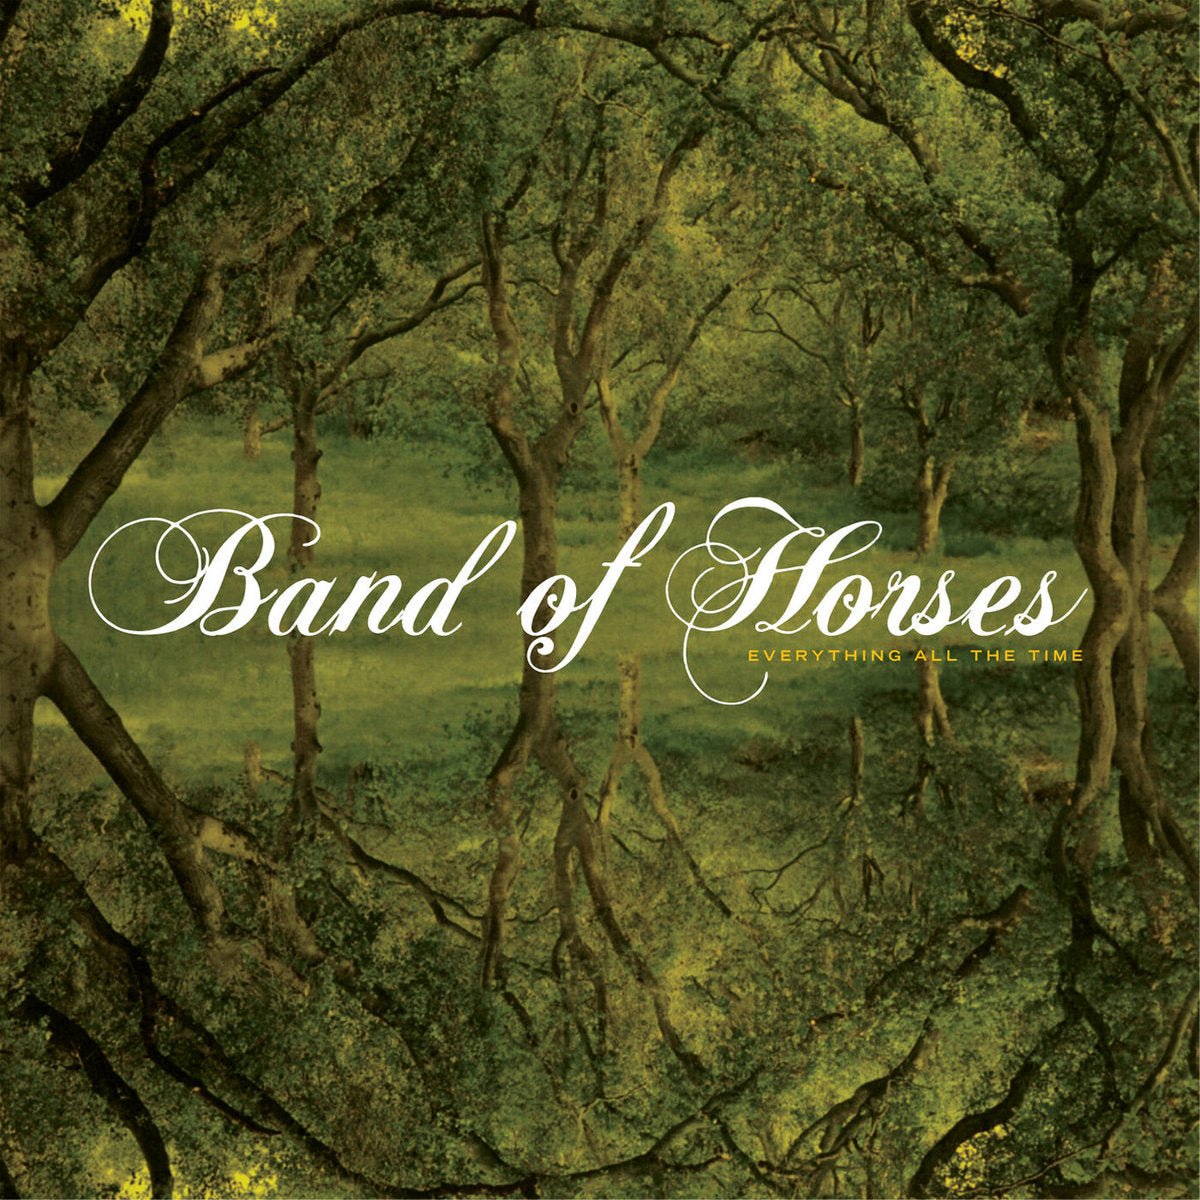 Band of Horses - Everything All The Time LP - Vinyl - Sub Pop